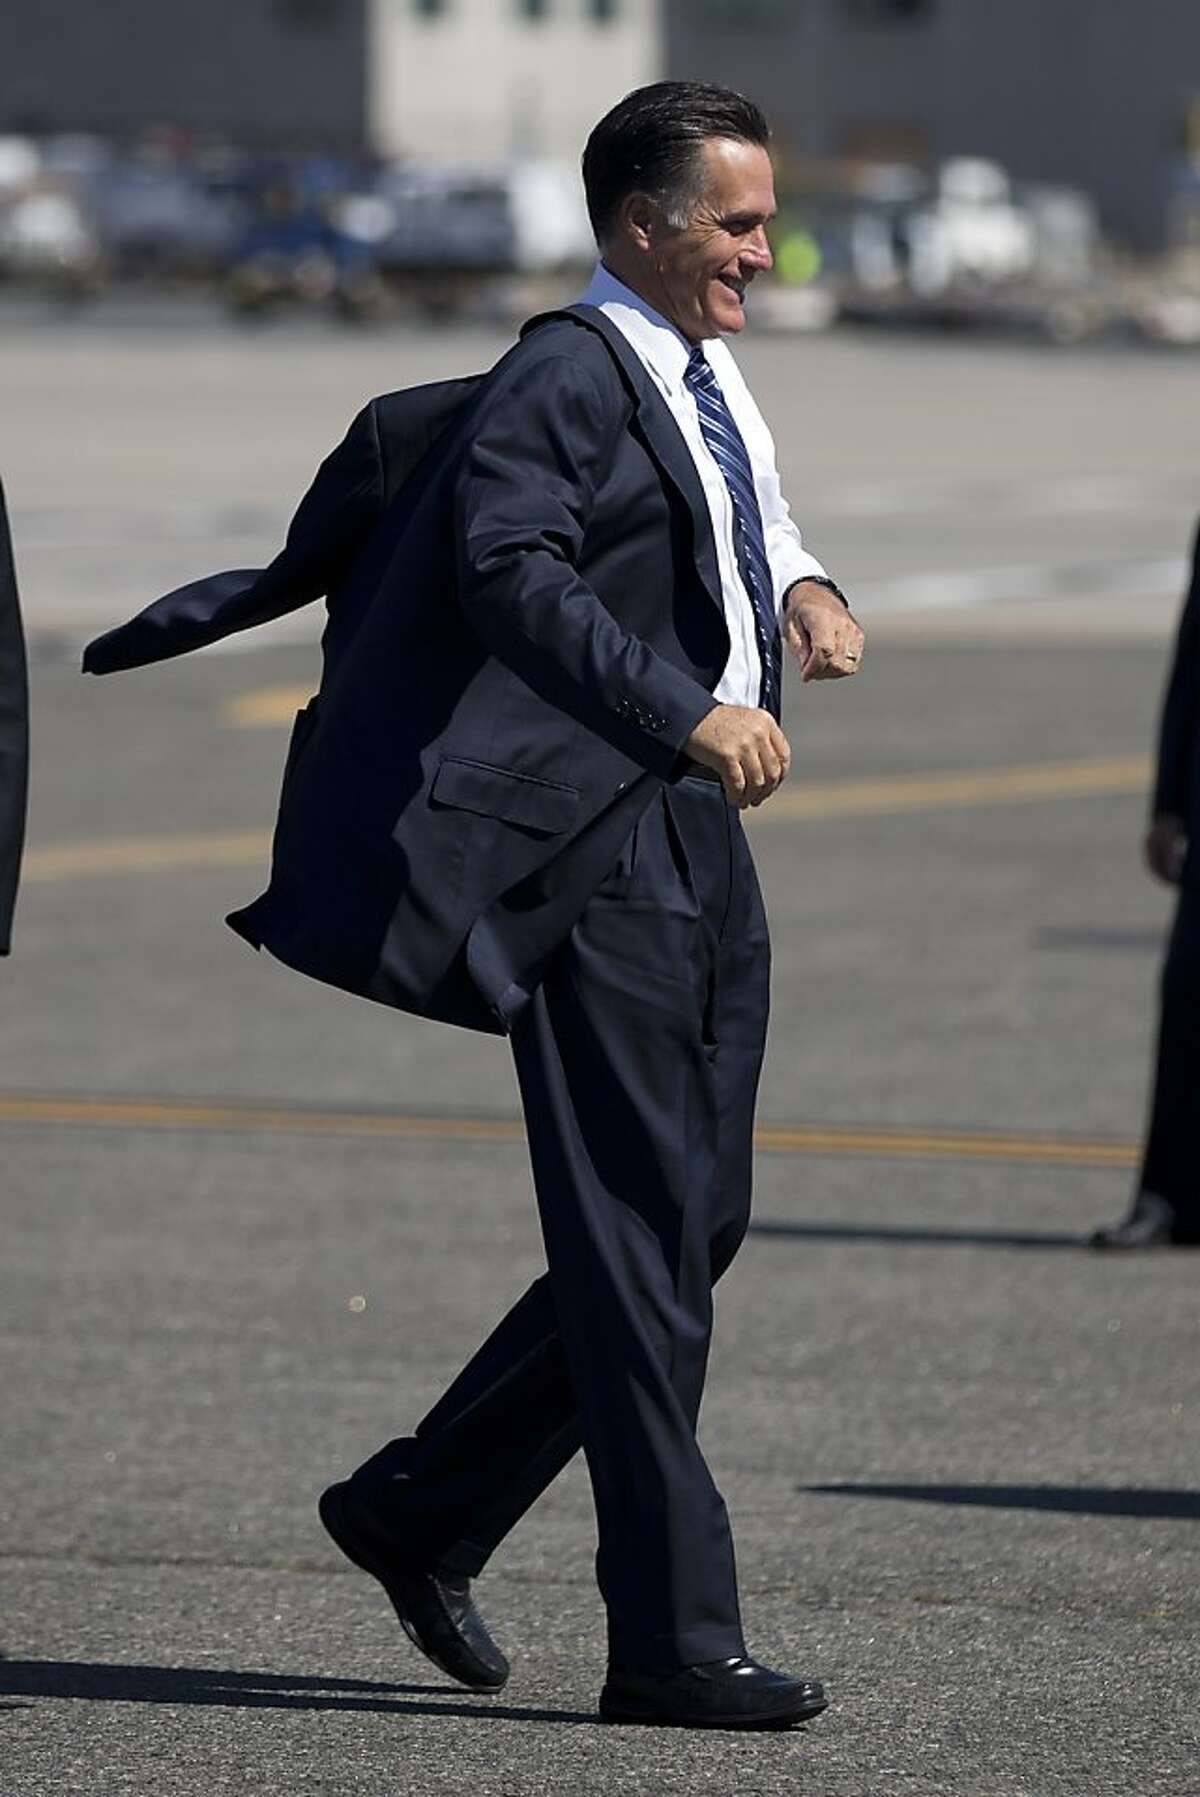 Republican presidential candidate, former Massachusetts Gov. Mitt Romney puts on a jacket as he boards a flight for a campaign stop in Dayton, Ohio, Tuesday, Sept. 25, 2012, in Newark, N.J. (AP Photo/ Evan Vucci)